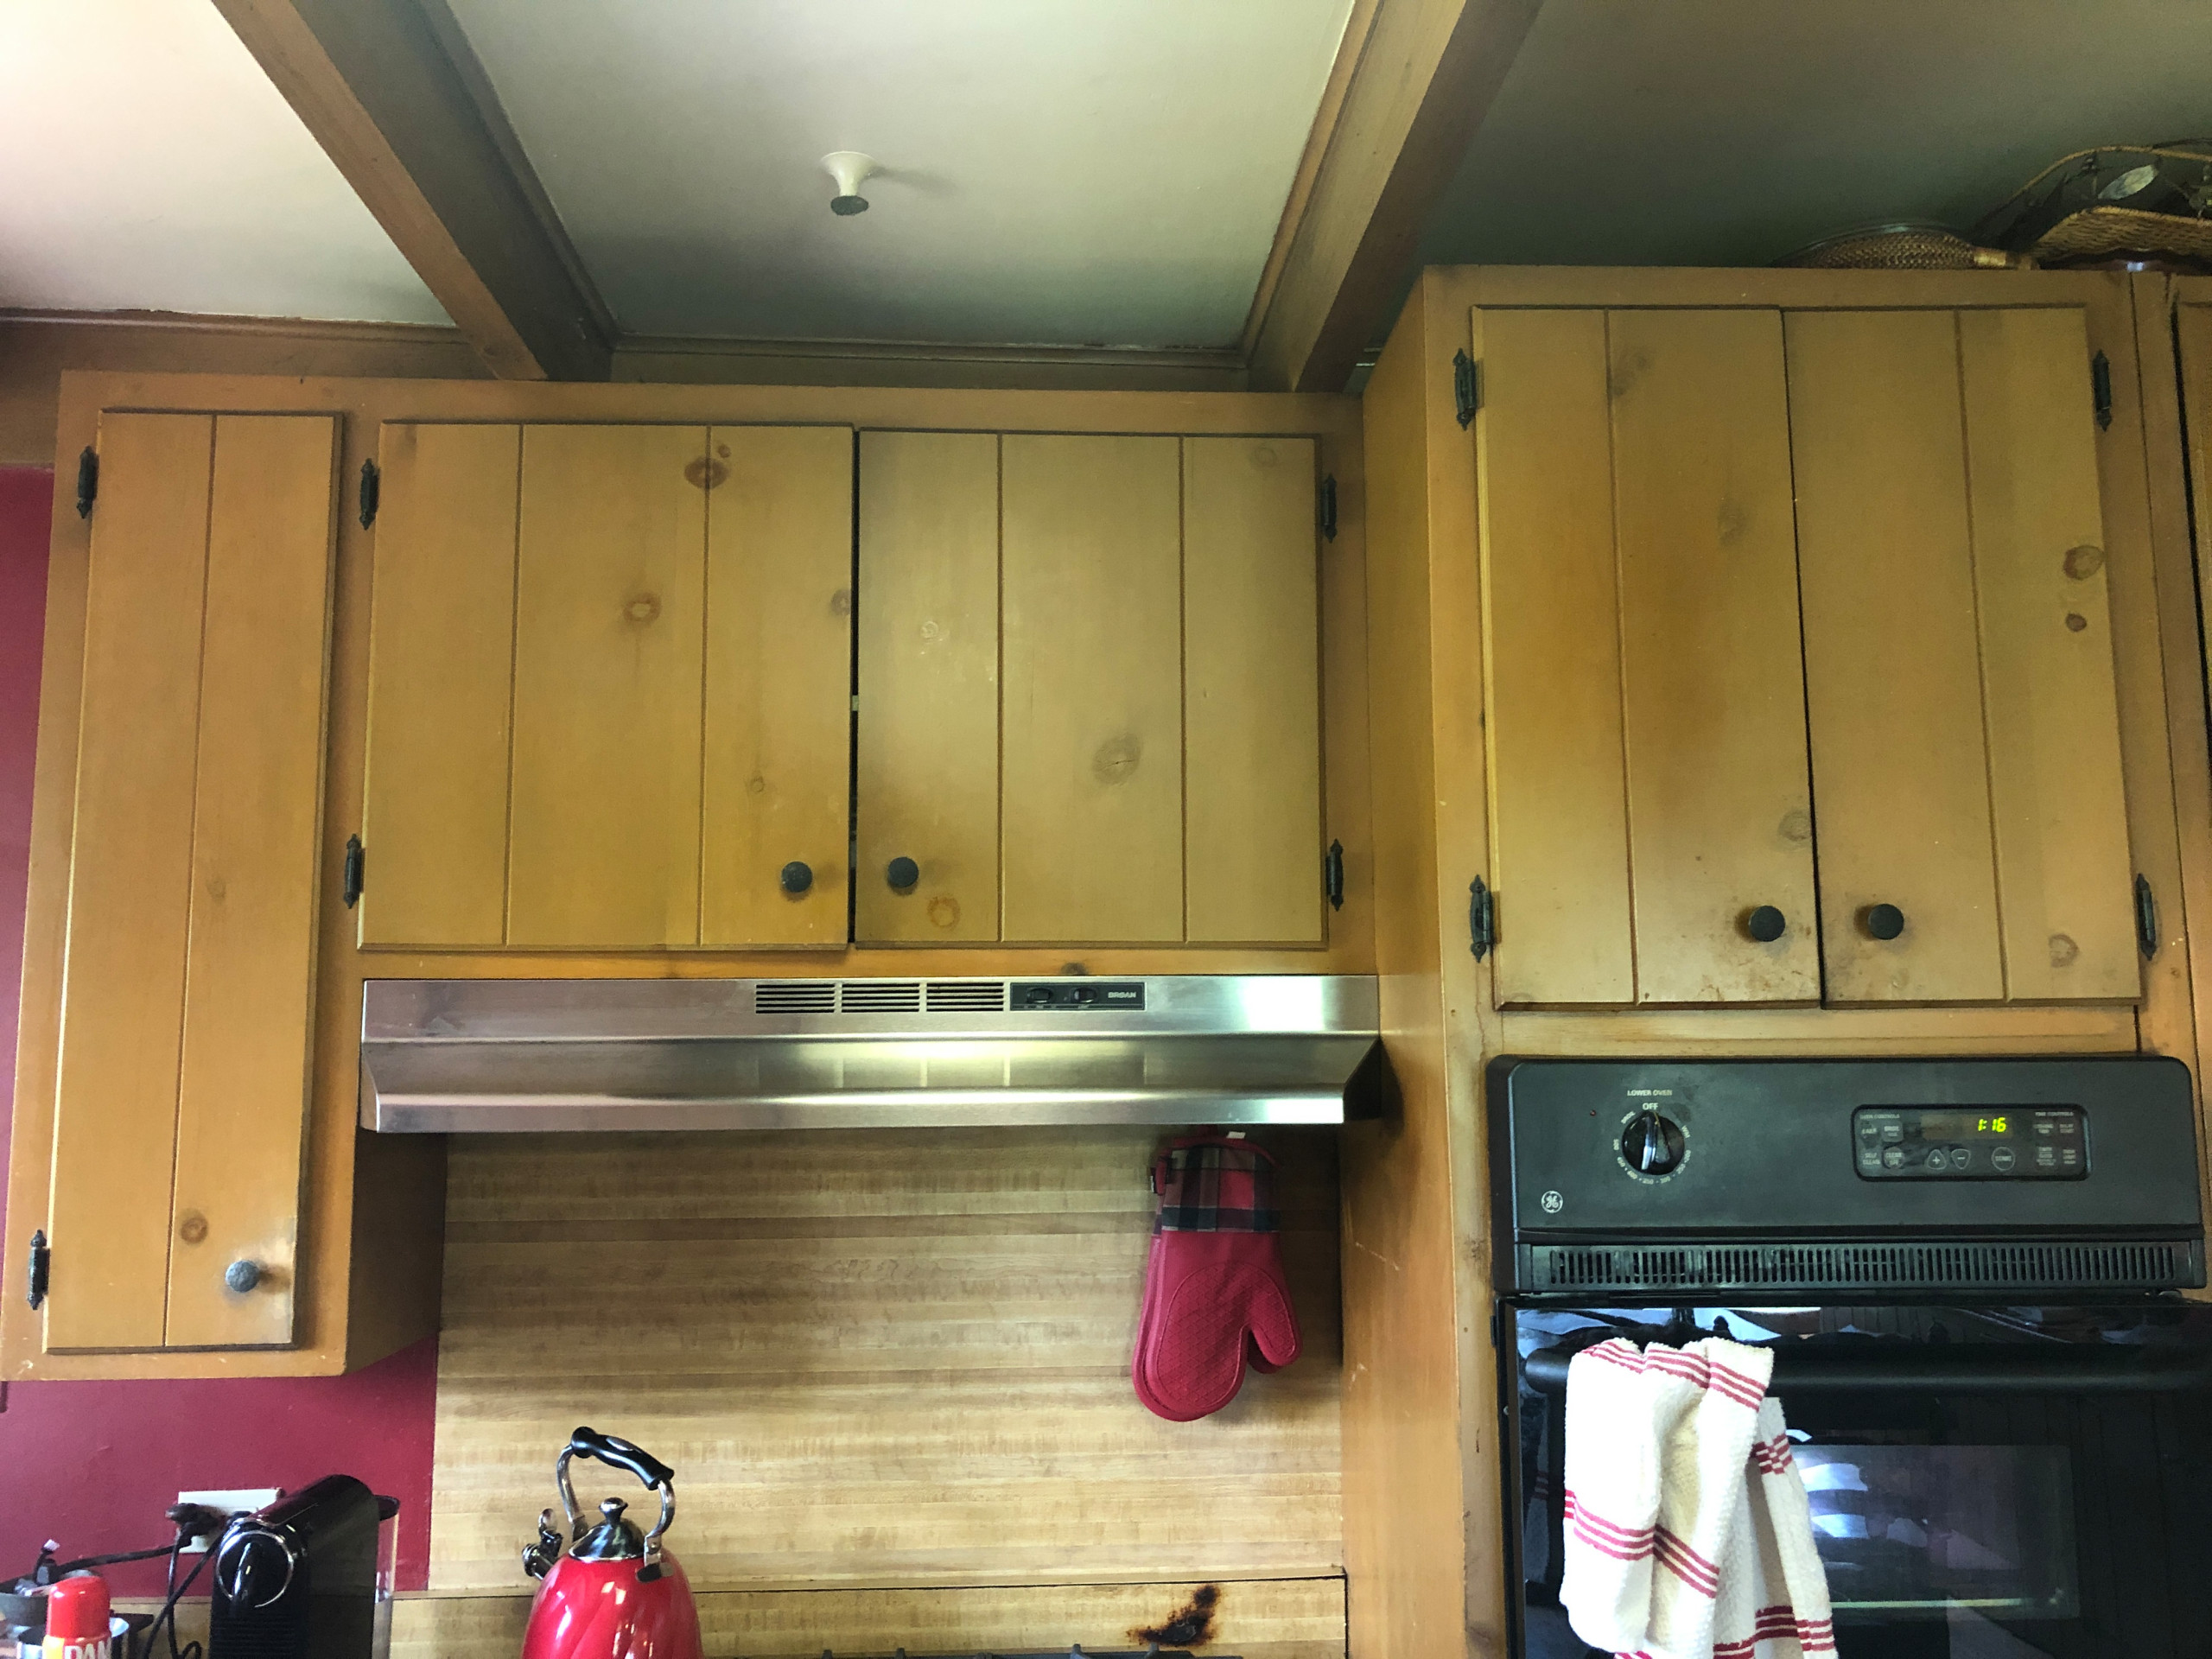 Kitchen remake with original cabinetry